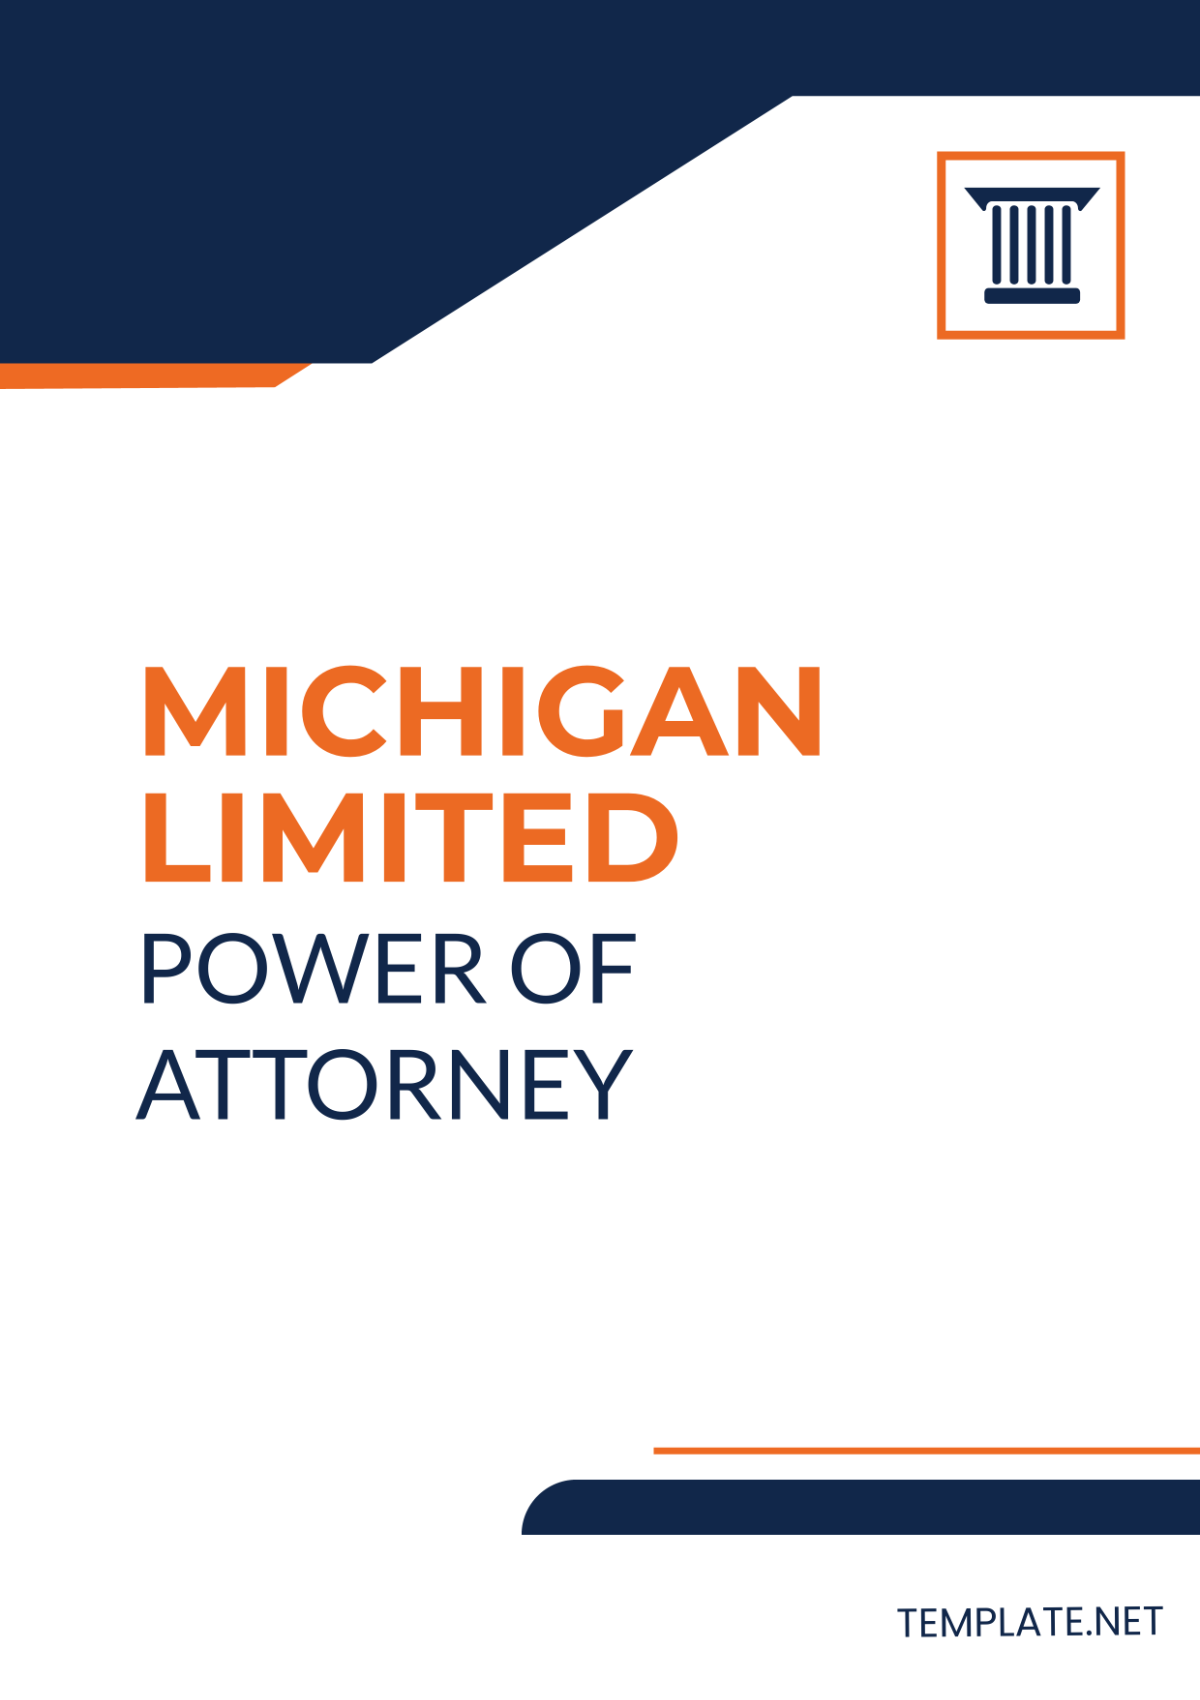 Michigan Limited Power of Attorney Template